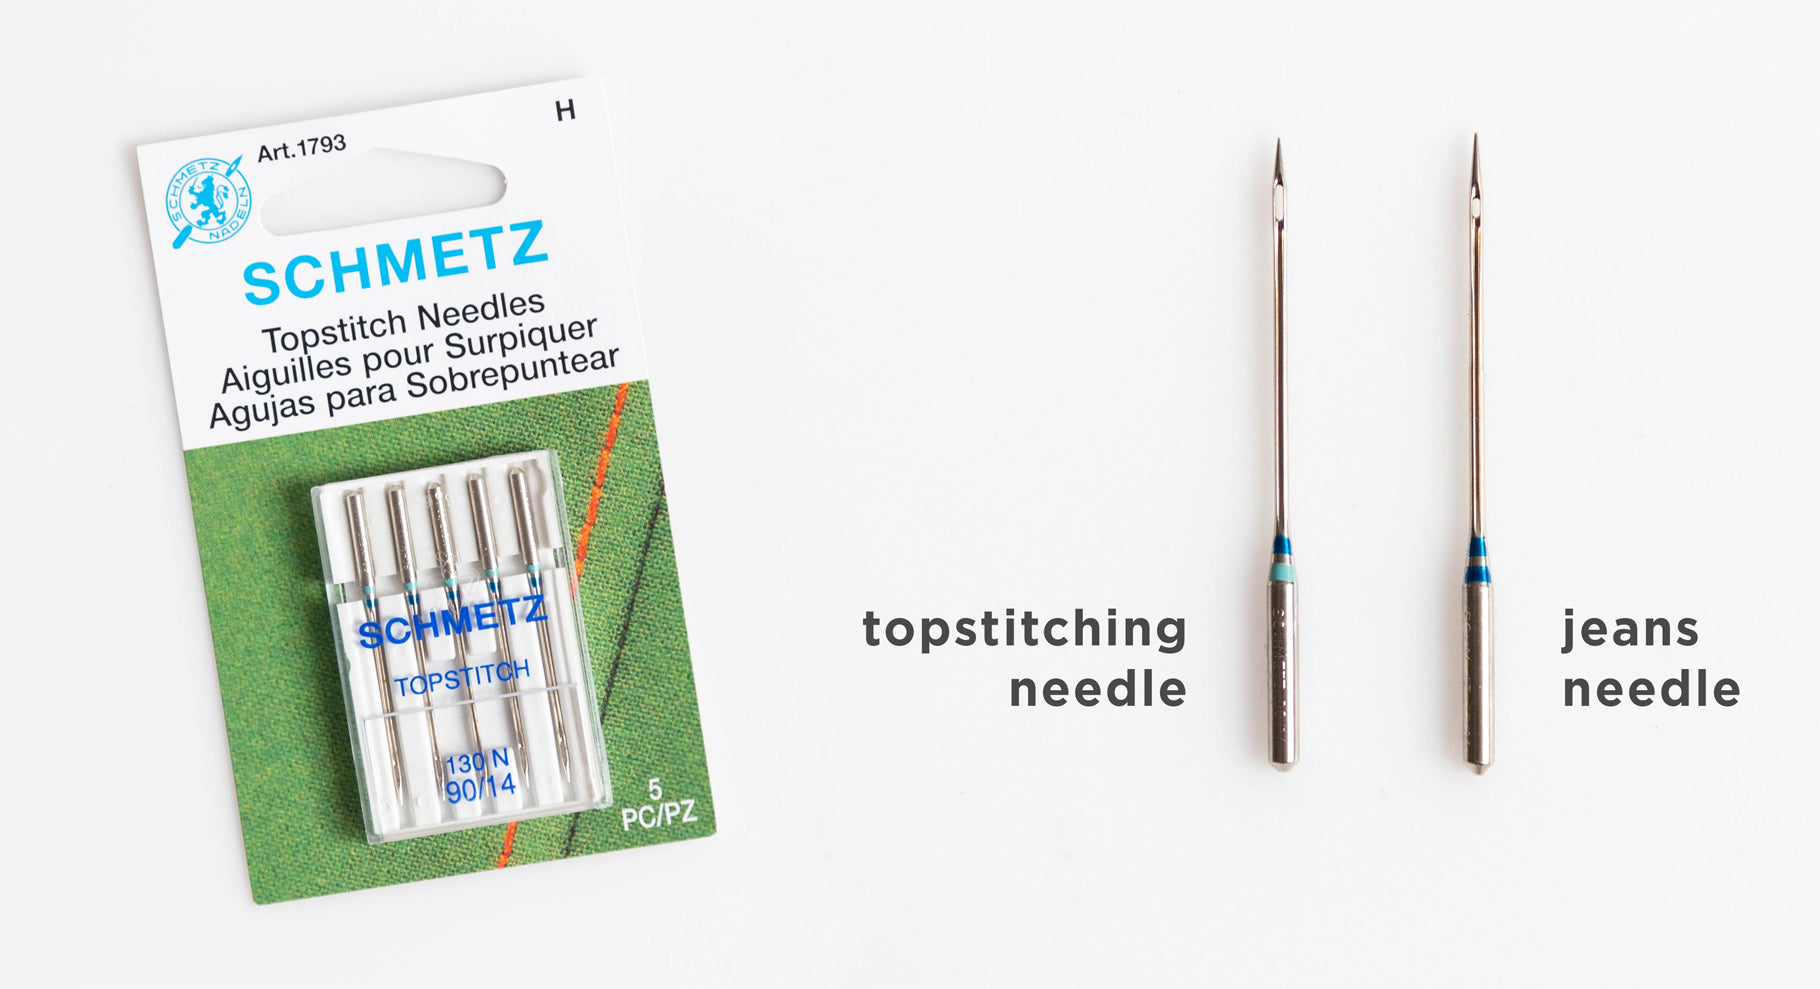 Our Top Tips for Professional Topstitching: Using the proper needle size | Grainline Studio